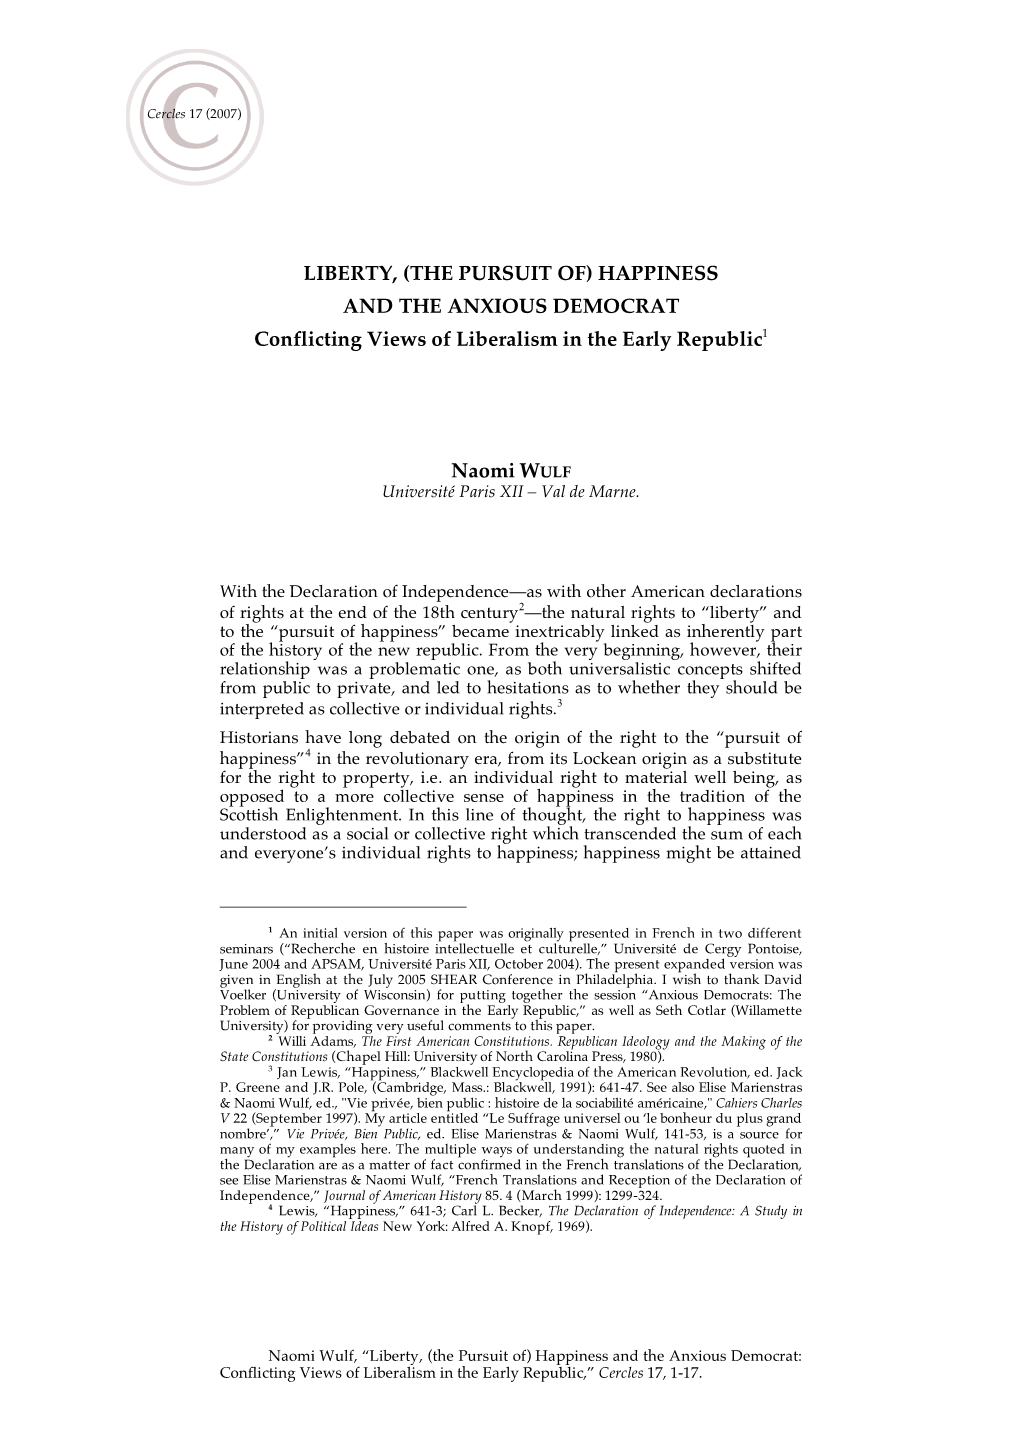 LIBERTY, (THE PURSUIT OF) HAPPINESS and the ANXIOUS DEMOCRAT Conflicting Views of Liberalism in the Early Republic1